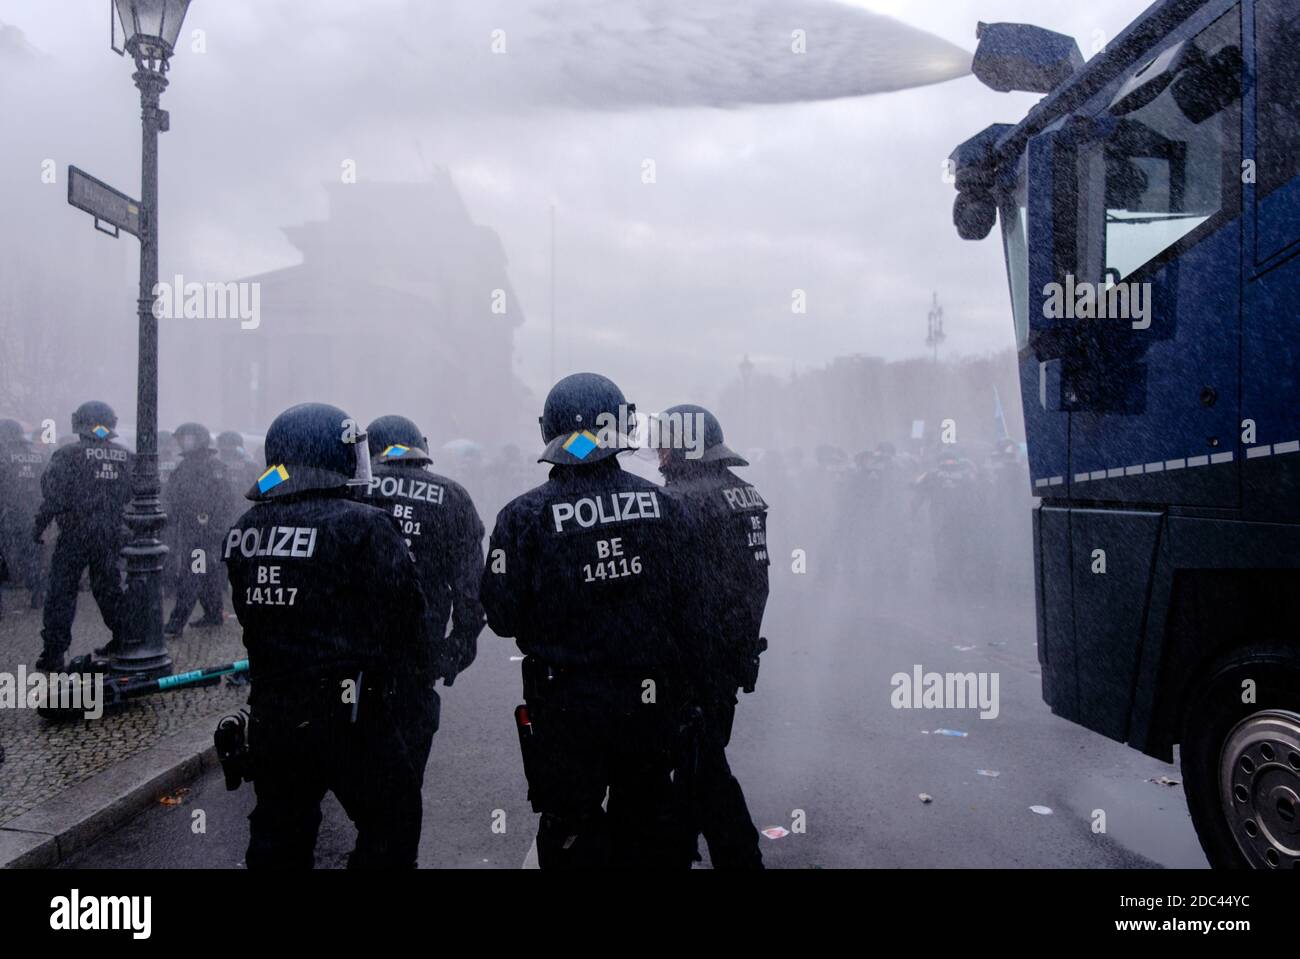 Berlin, Berlin, Germany. 18th Nov, 2020. Police can be seen during the use of water cannons after heterogeneous groups around Corona deniers, conspiracy theorists and right-wing extremists called for blocking access to German Government Buildings. Both the Bundestag and the Bundesrat vote on planned new regulations of the infection protection law on November 18, 2020. Credit: Jan Scheunert/ZUMA Wire/Alamy Live News Stock Photo